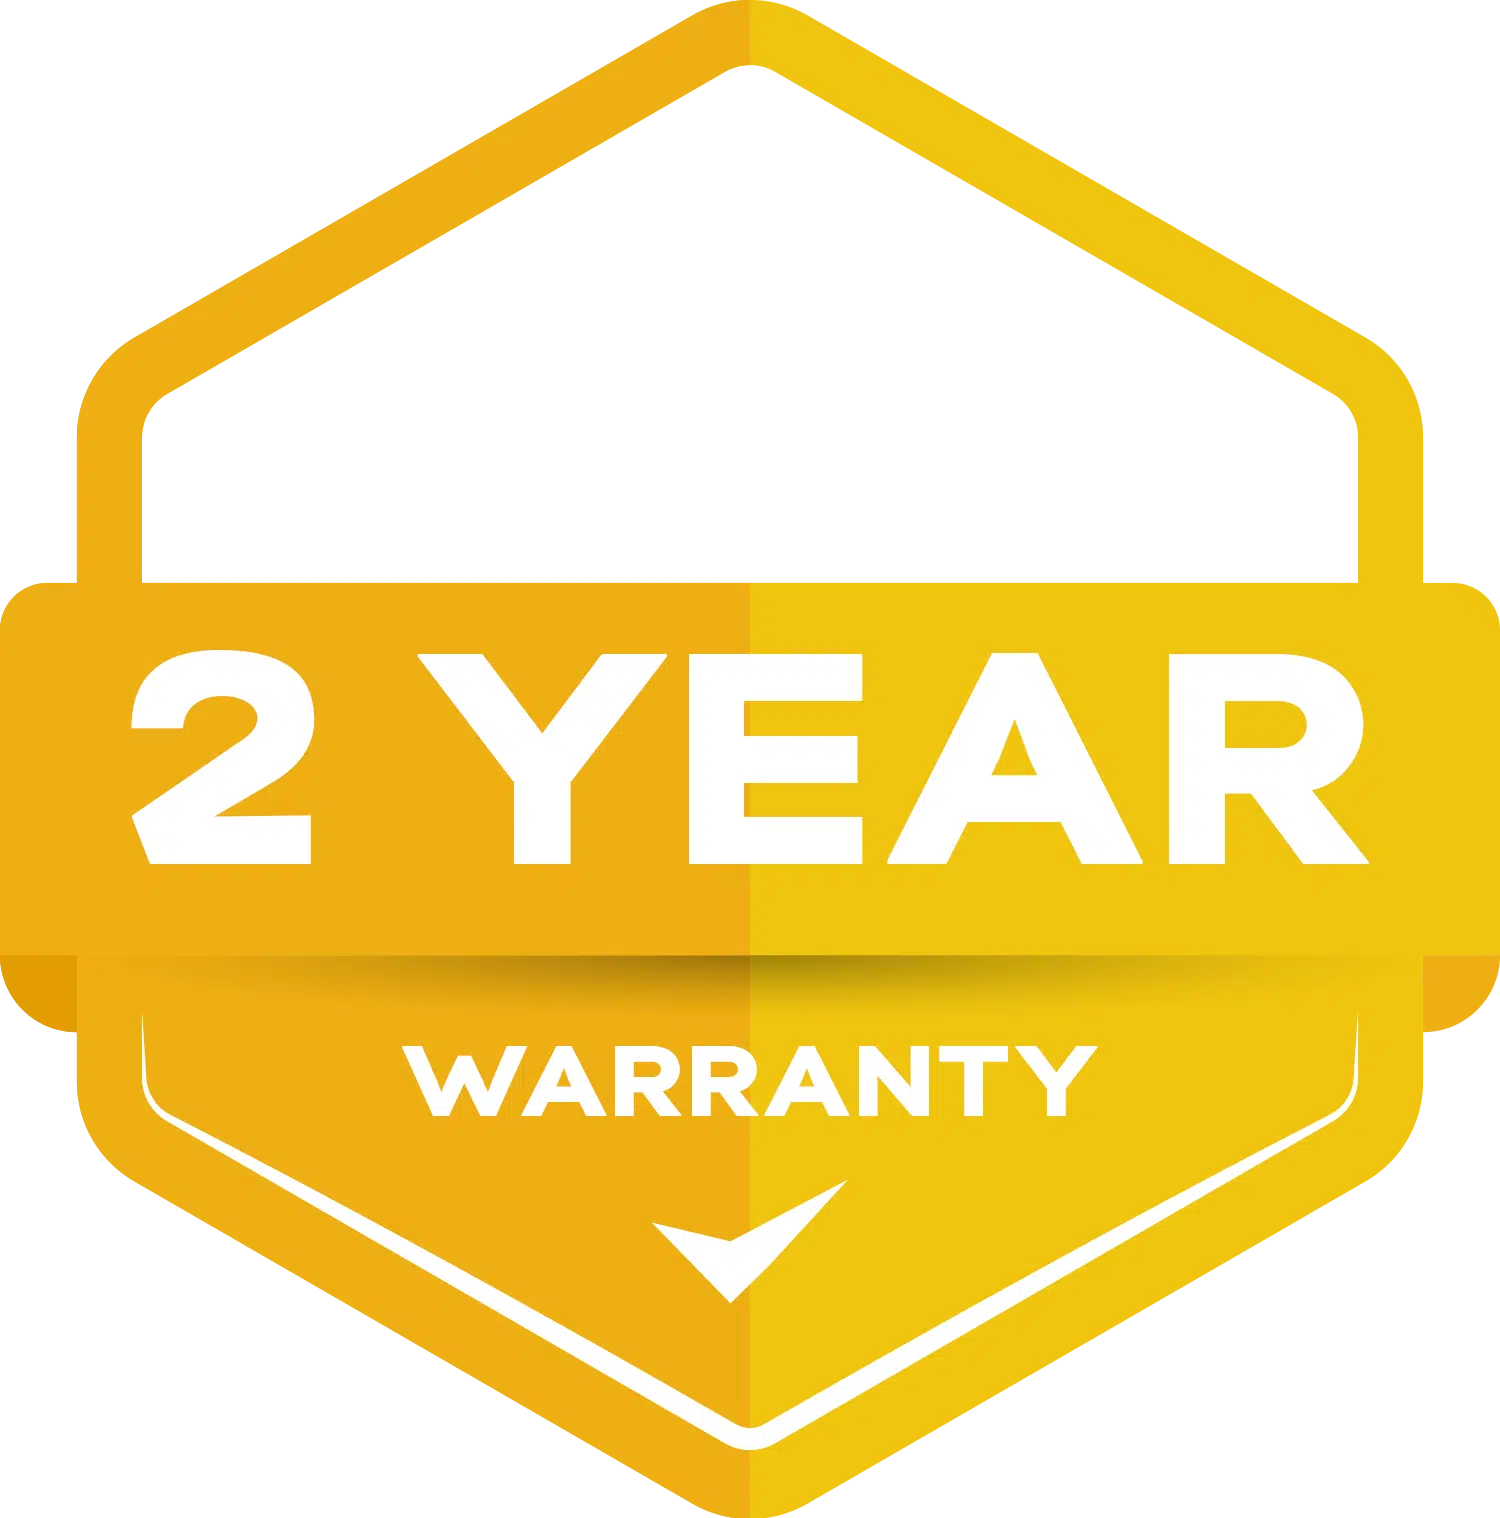 Extended Warranty 2 Year – P5000